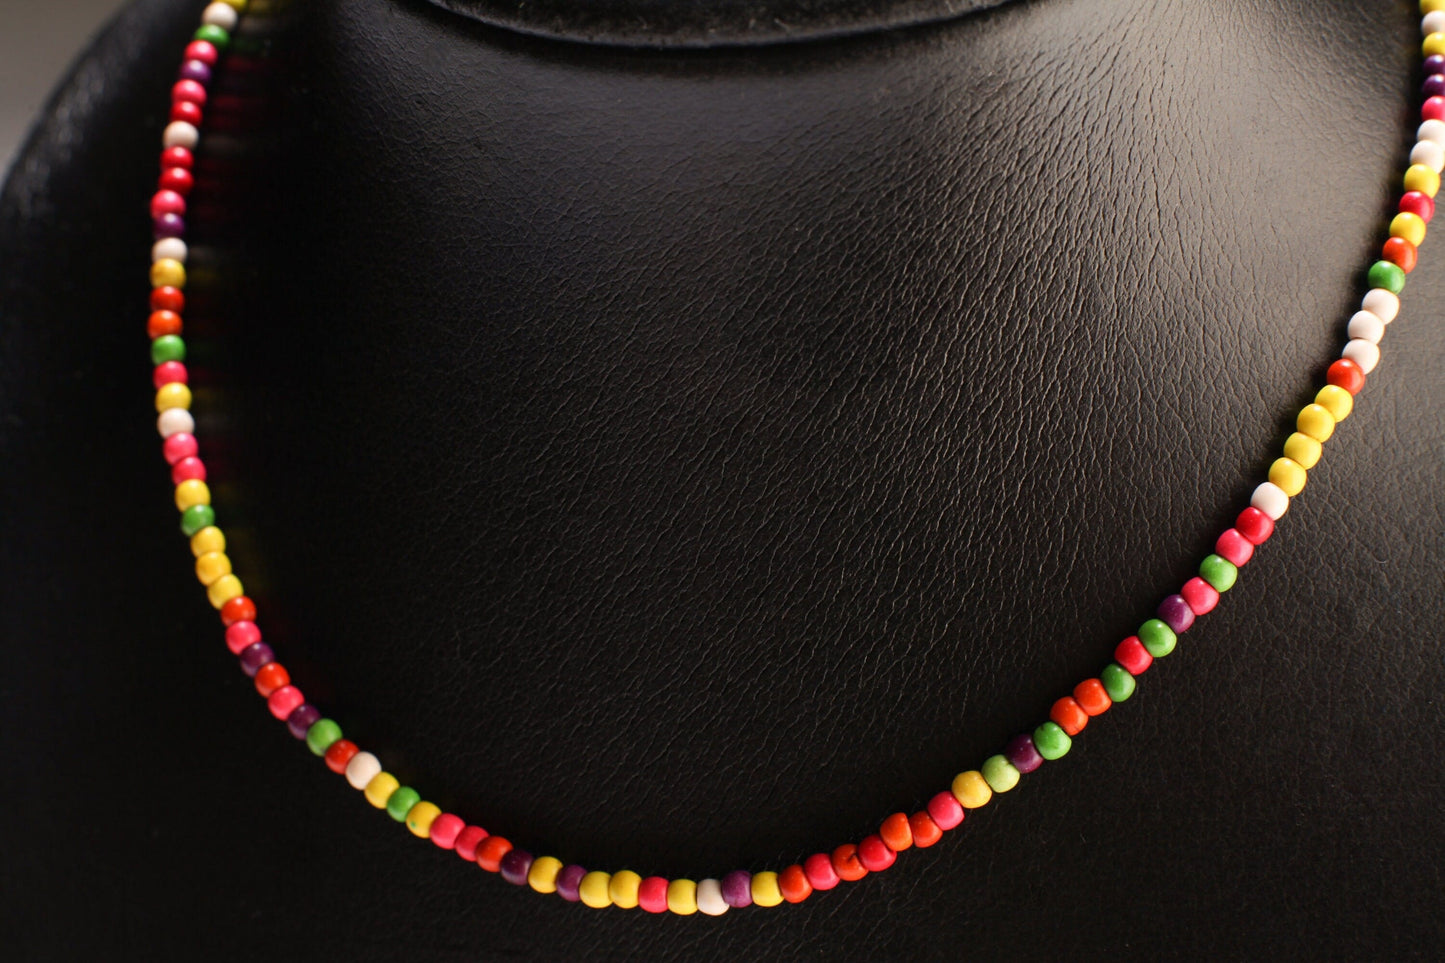 Multi color Magnesite 3mm Rondelle Beads Choker Necklace. African beads , summer style bright orange yellow purple green beads